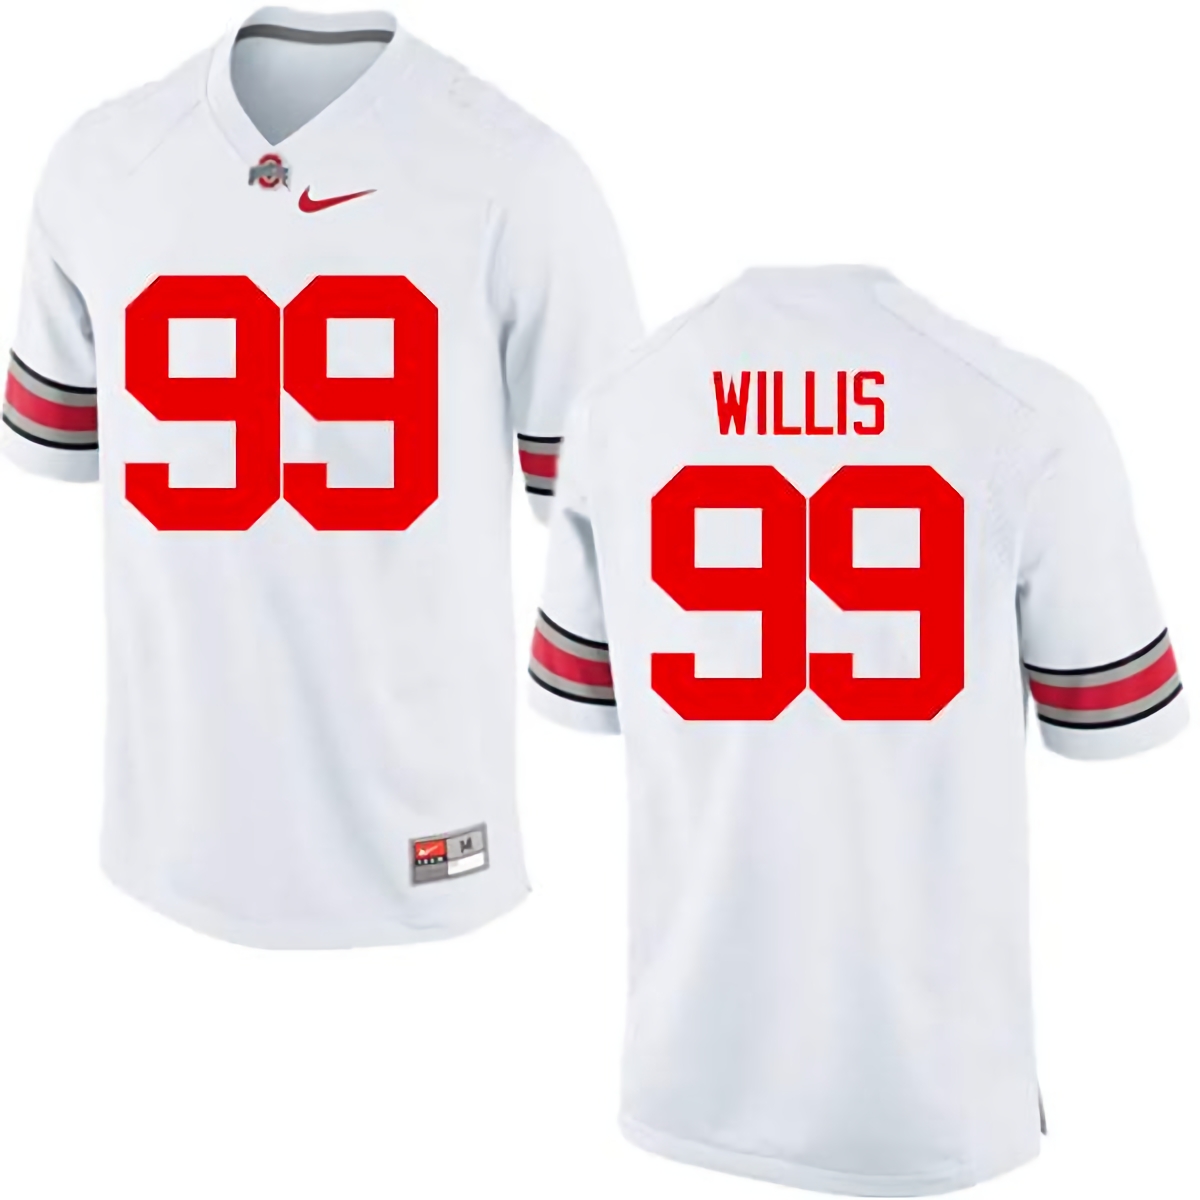 Bill Willis Ohio State Buckeyes Men's NCAA #99 Nike White College Stitched Football Jersey CMR1056FT